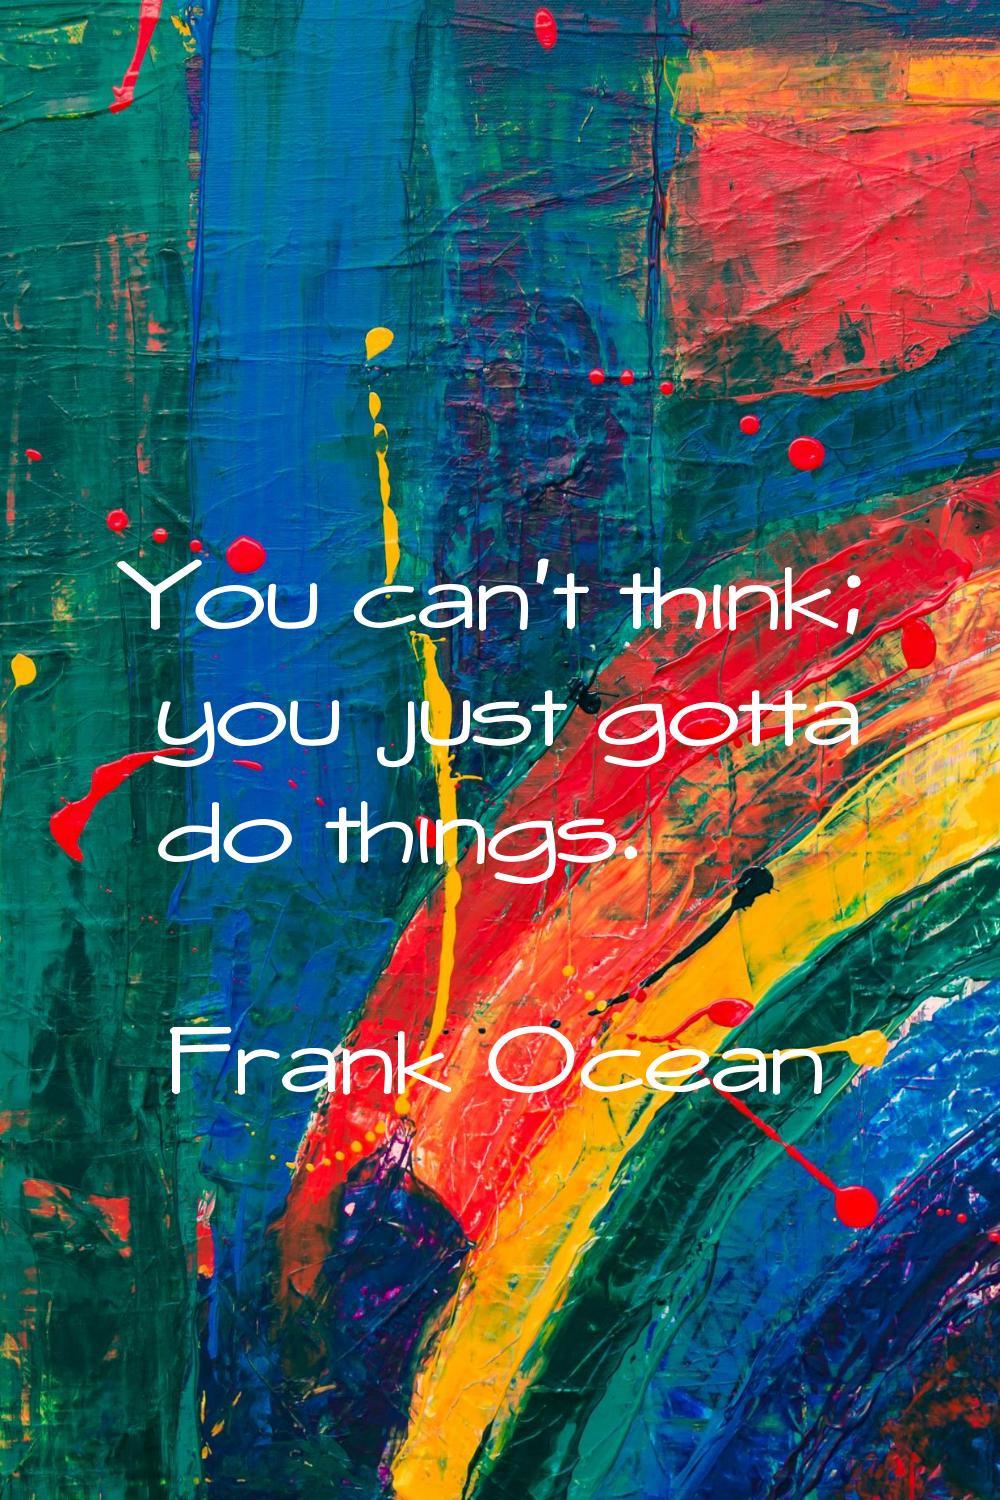 You can't think; you just gotta do things.